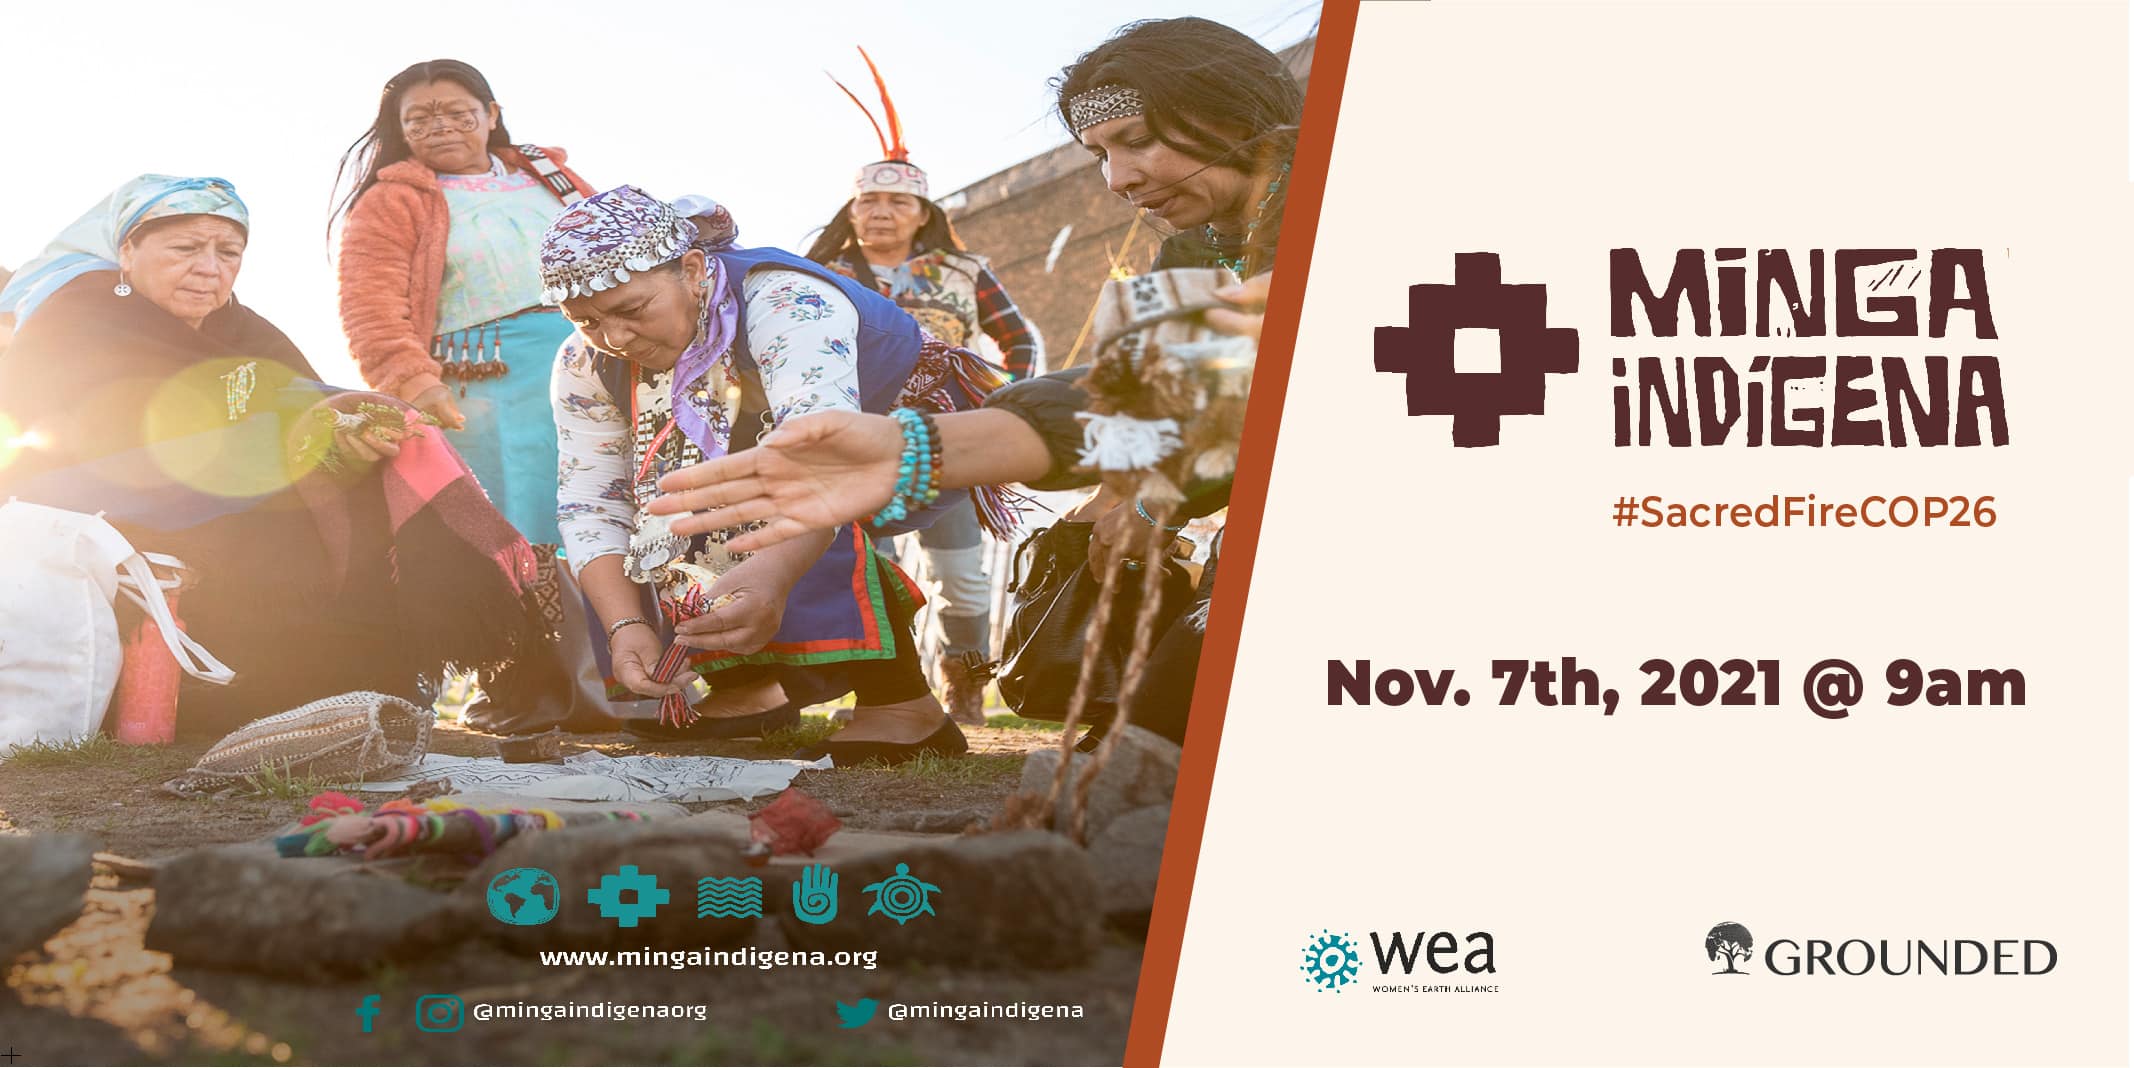 Click here to learn more about the Sacred Fire gathering at COP26